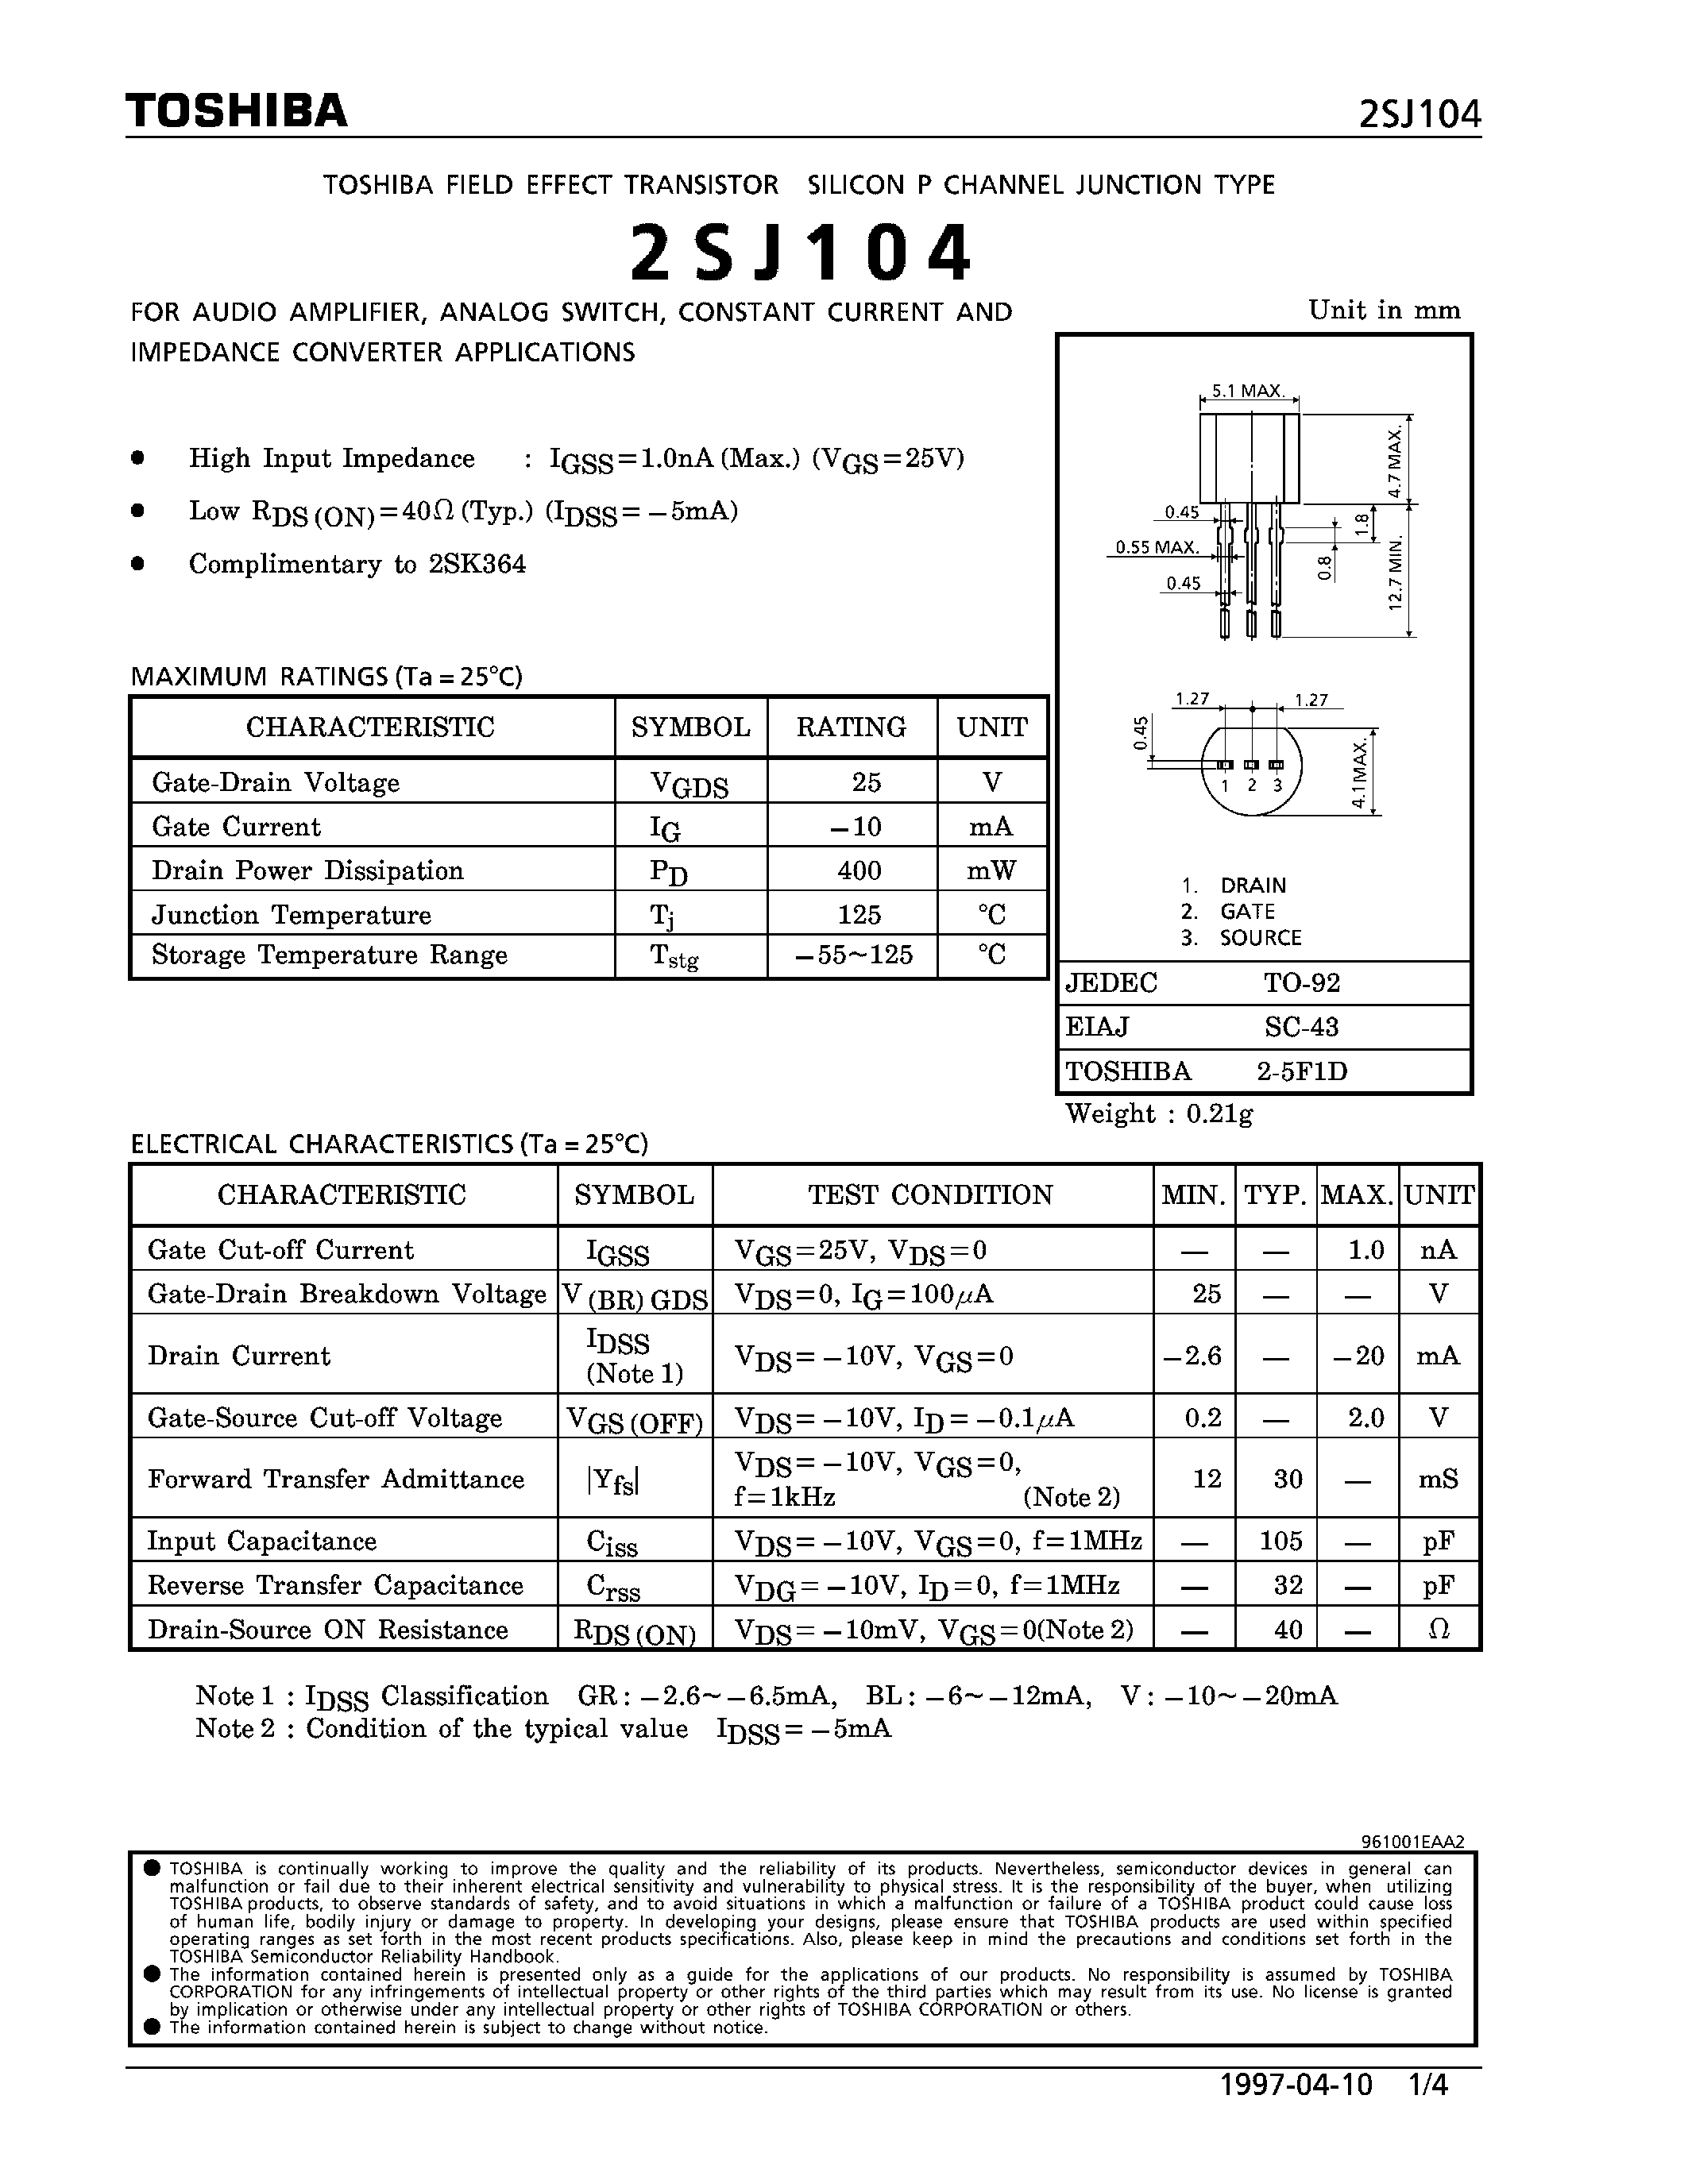 Datasheet 2SJ104 - P CHANNEL JUNCTION TYPE (FOR AUDIO AMPLIFIER/ ANALOG SWITCH/ CONSTANT CURRENT AND IMPEDANCE CONVERTER APPLICATIONS) page 1